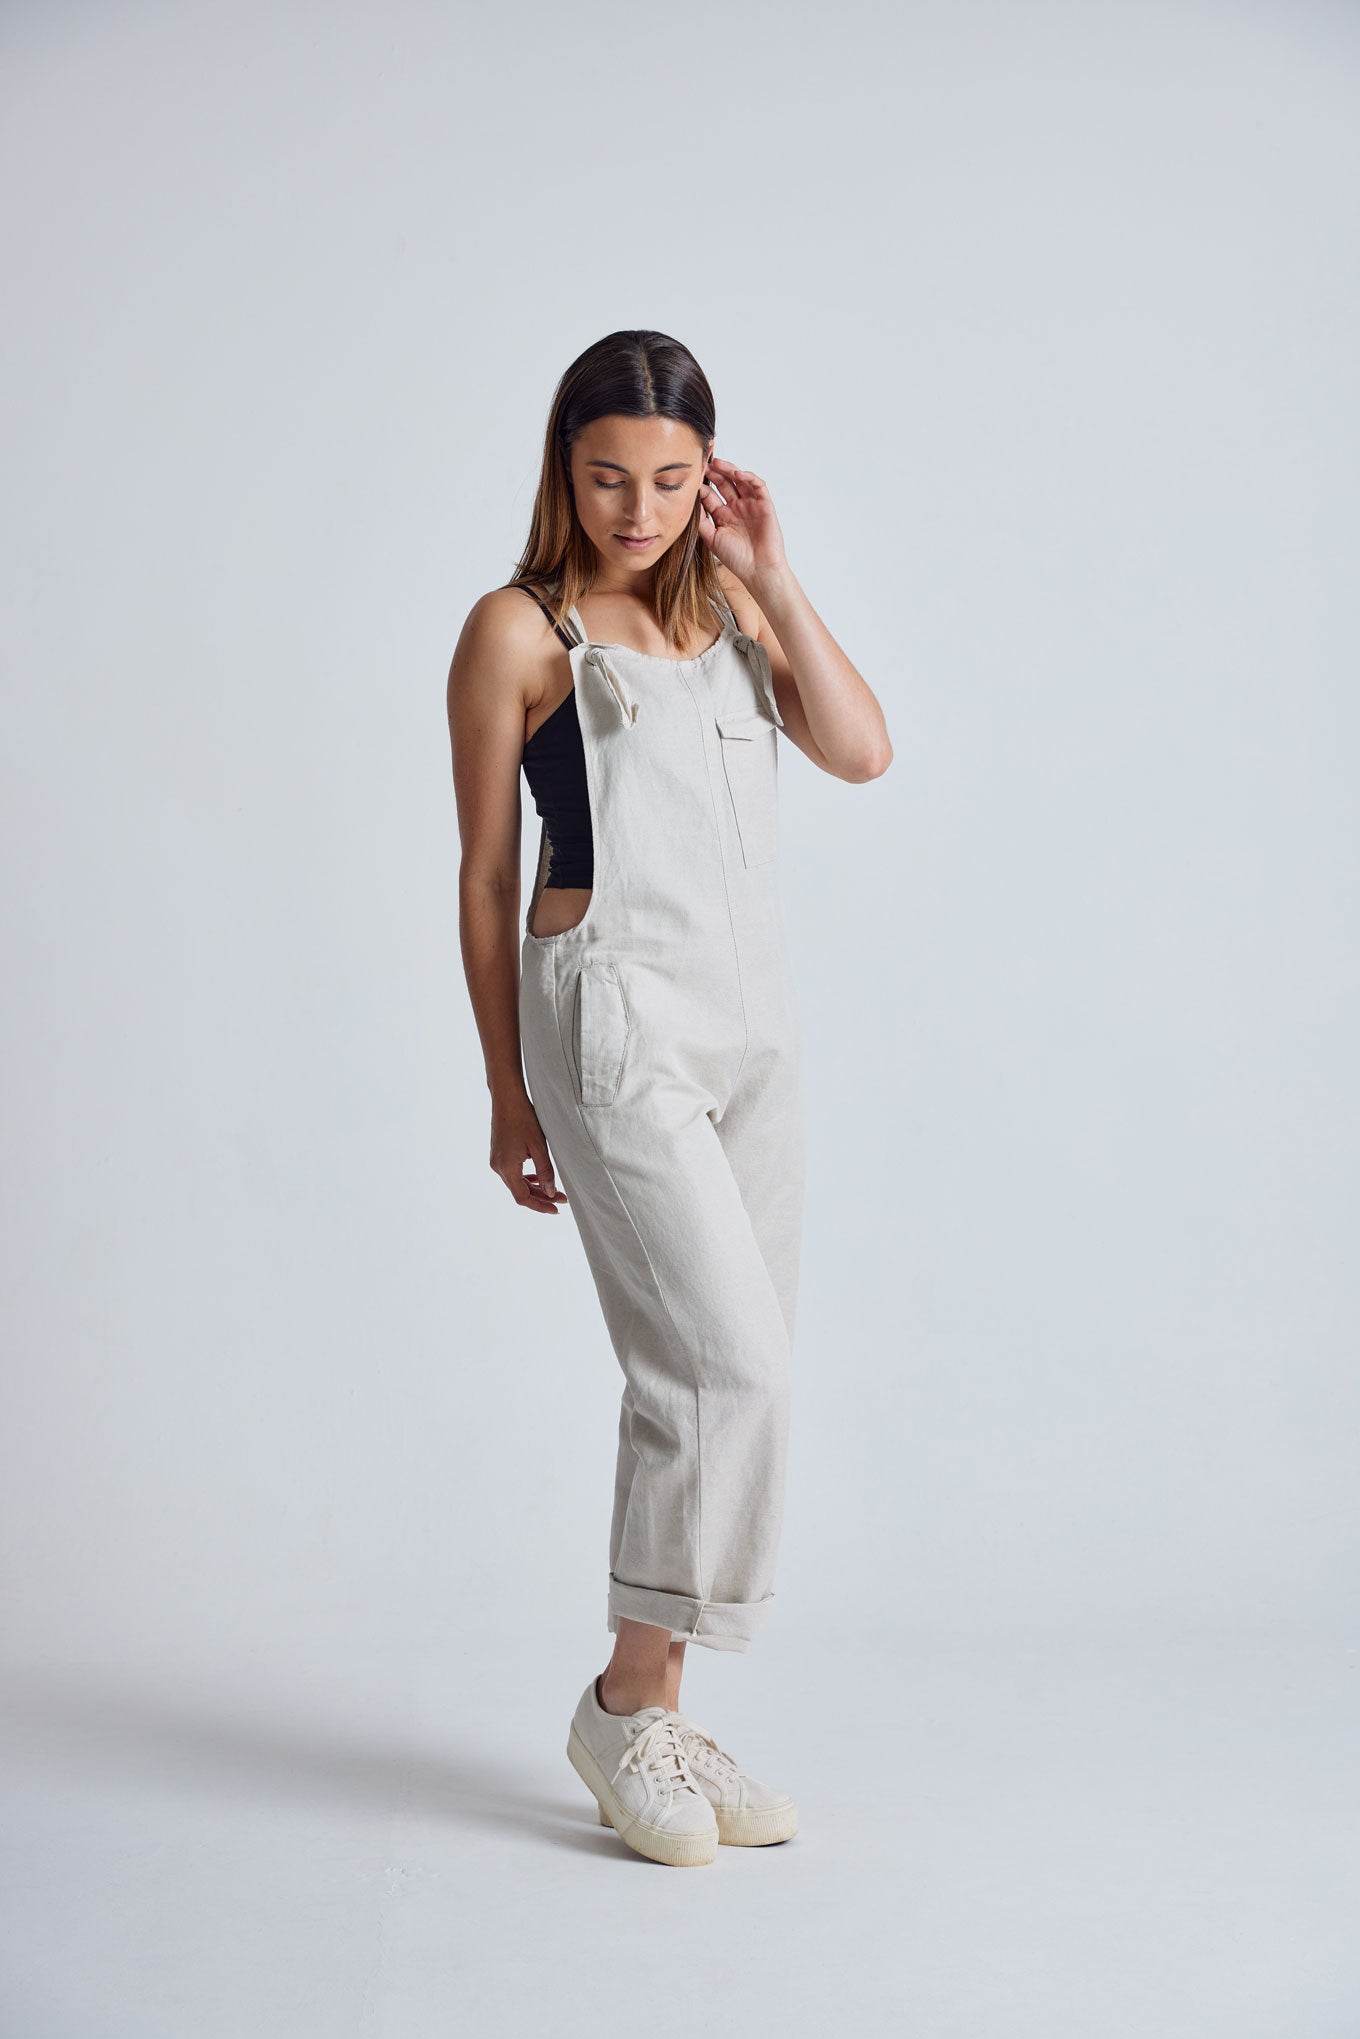 MARY-LOU Natural - GOTS Organic Cotton Dungarees by Flax & Loom, SIZE 2 / UK 10 / EUR 38